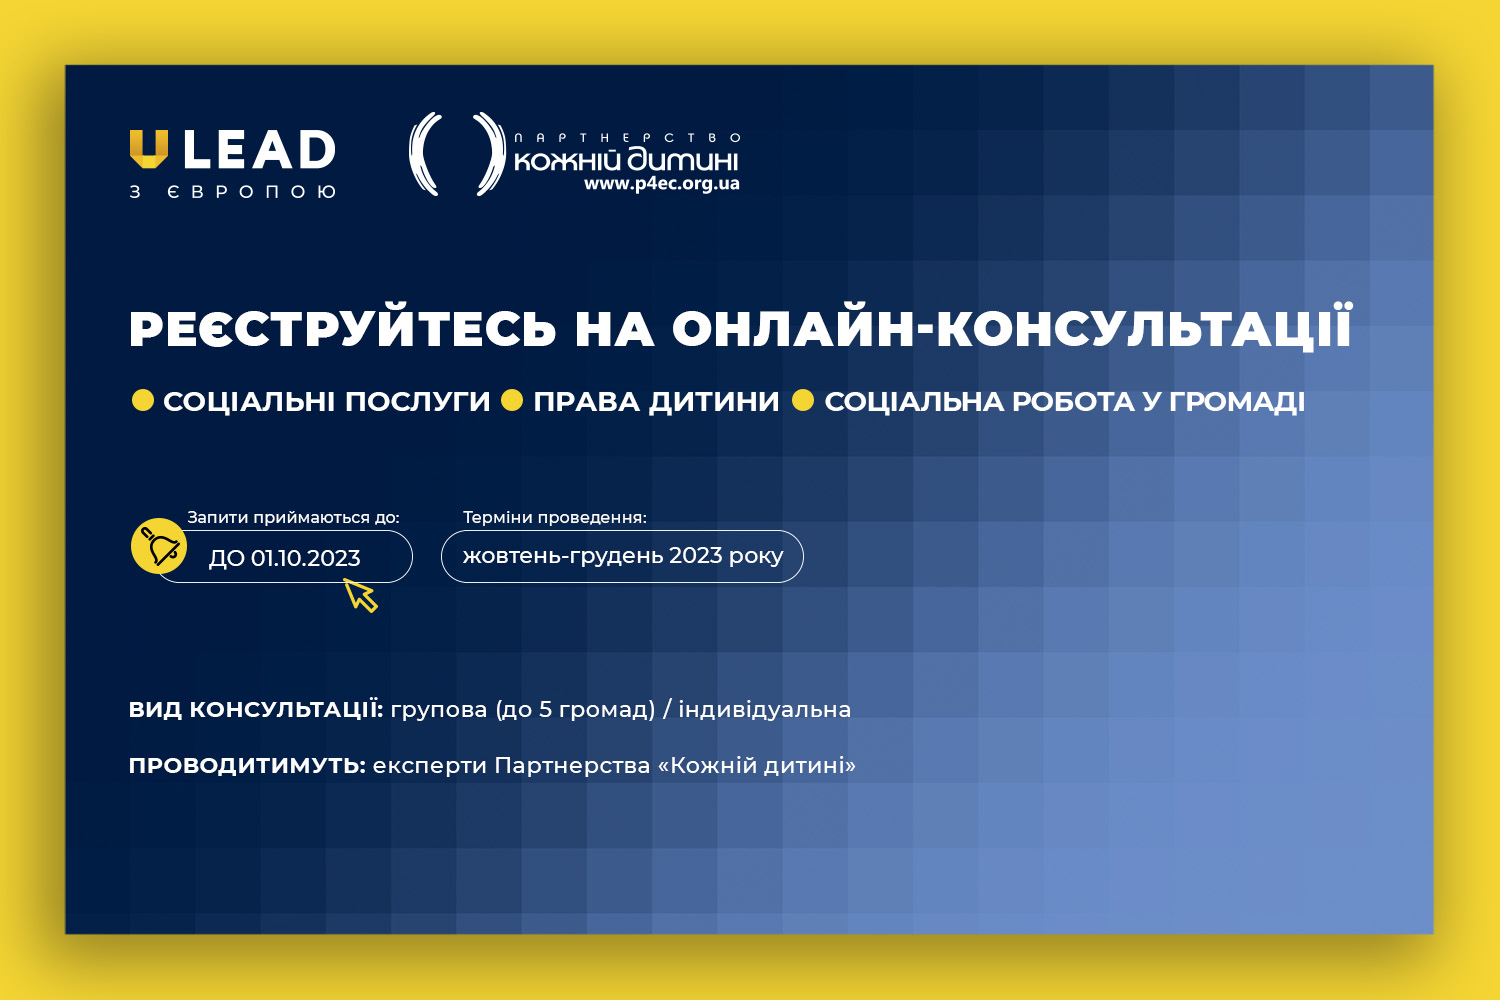 We invite municipalities to online consultations on social protection!